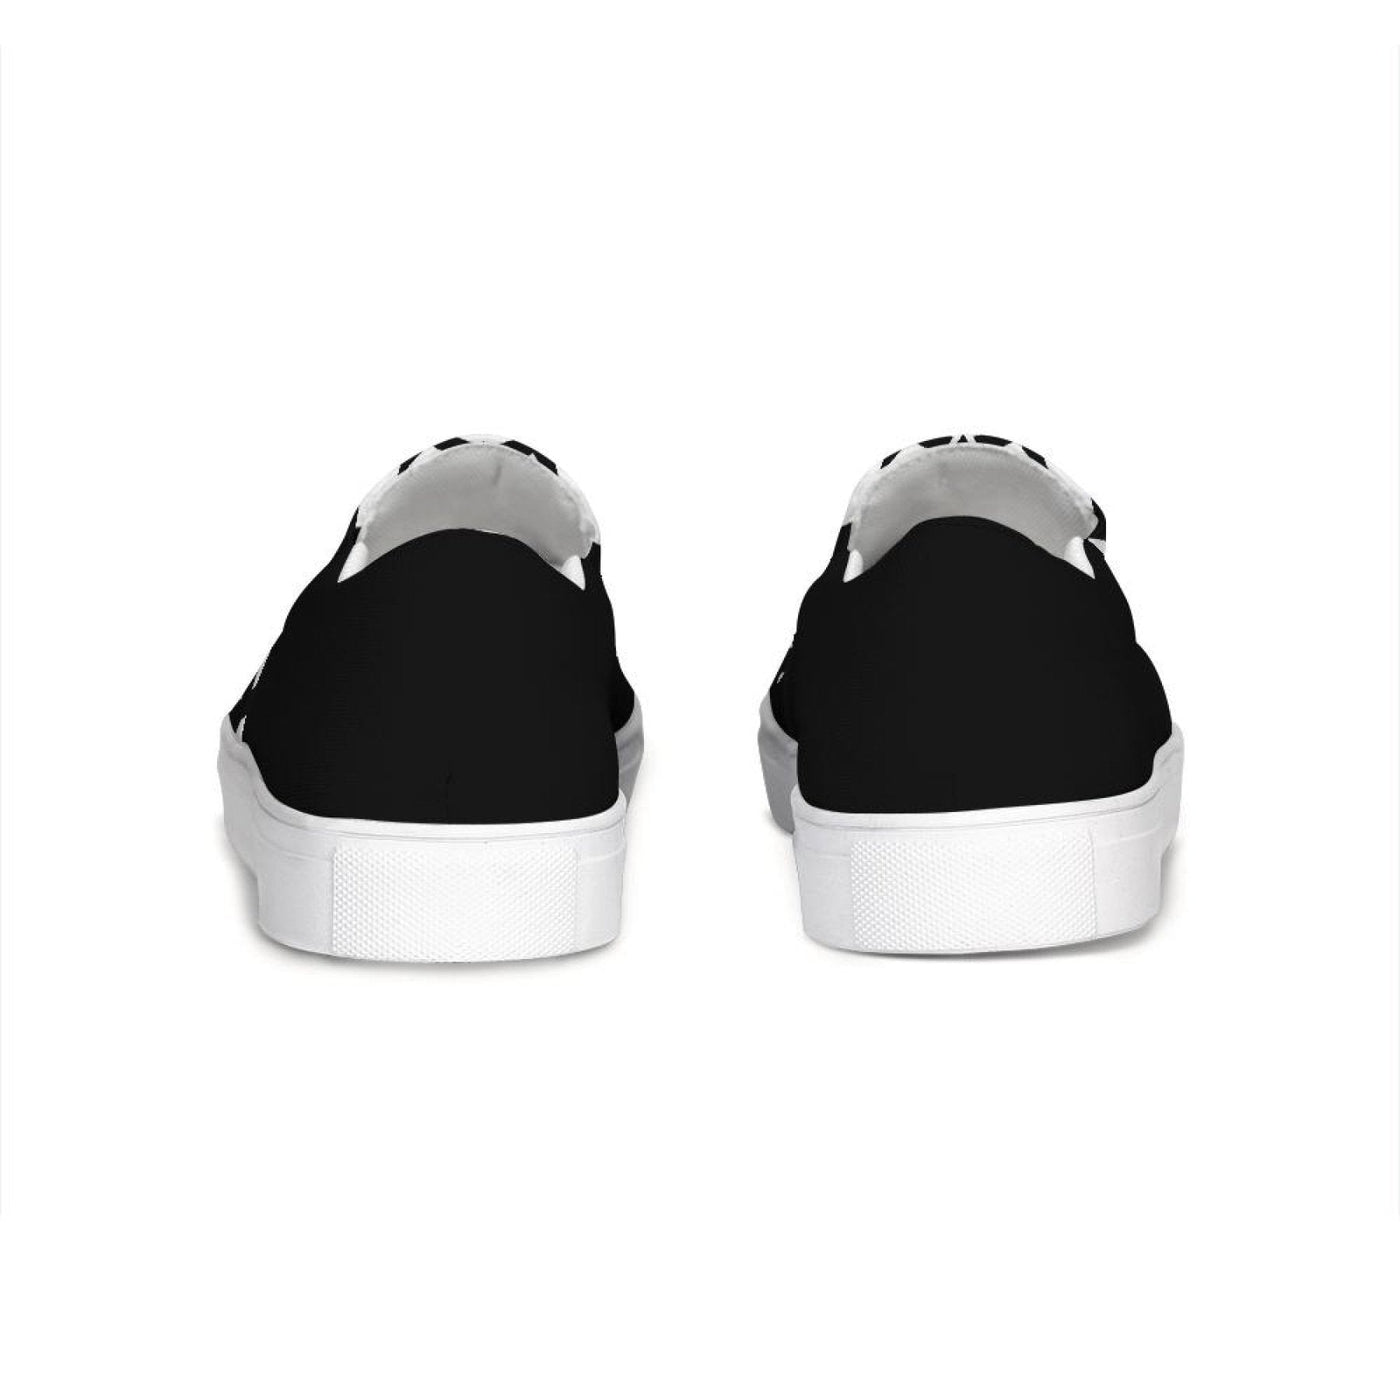 Womens Sneakers - Black & White Ichthys Style Low Top Slip-on Canvas Shoes -